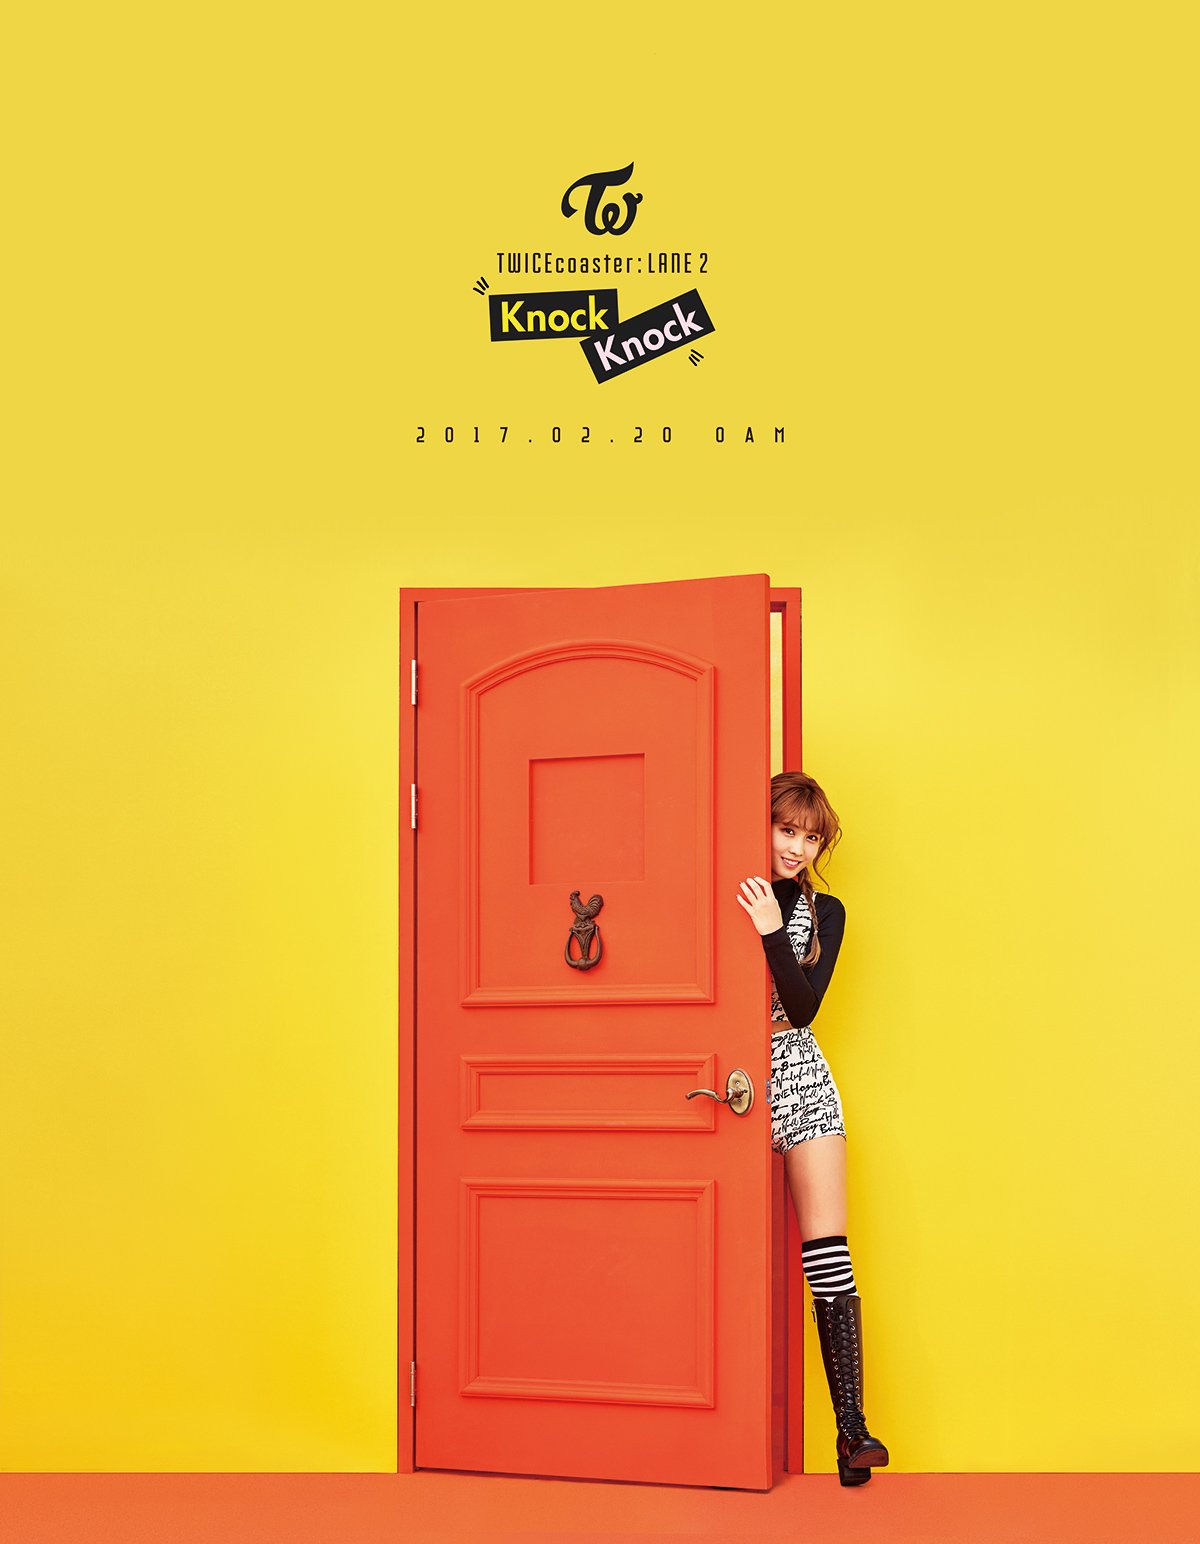 Knock Knock First Look Check Out This Comeback Single From Twice